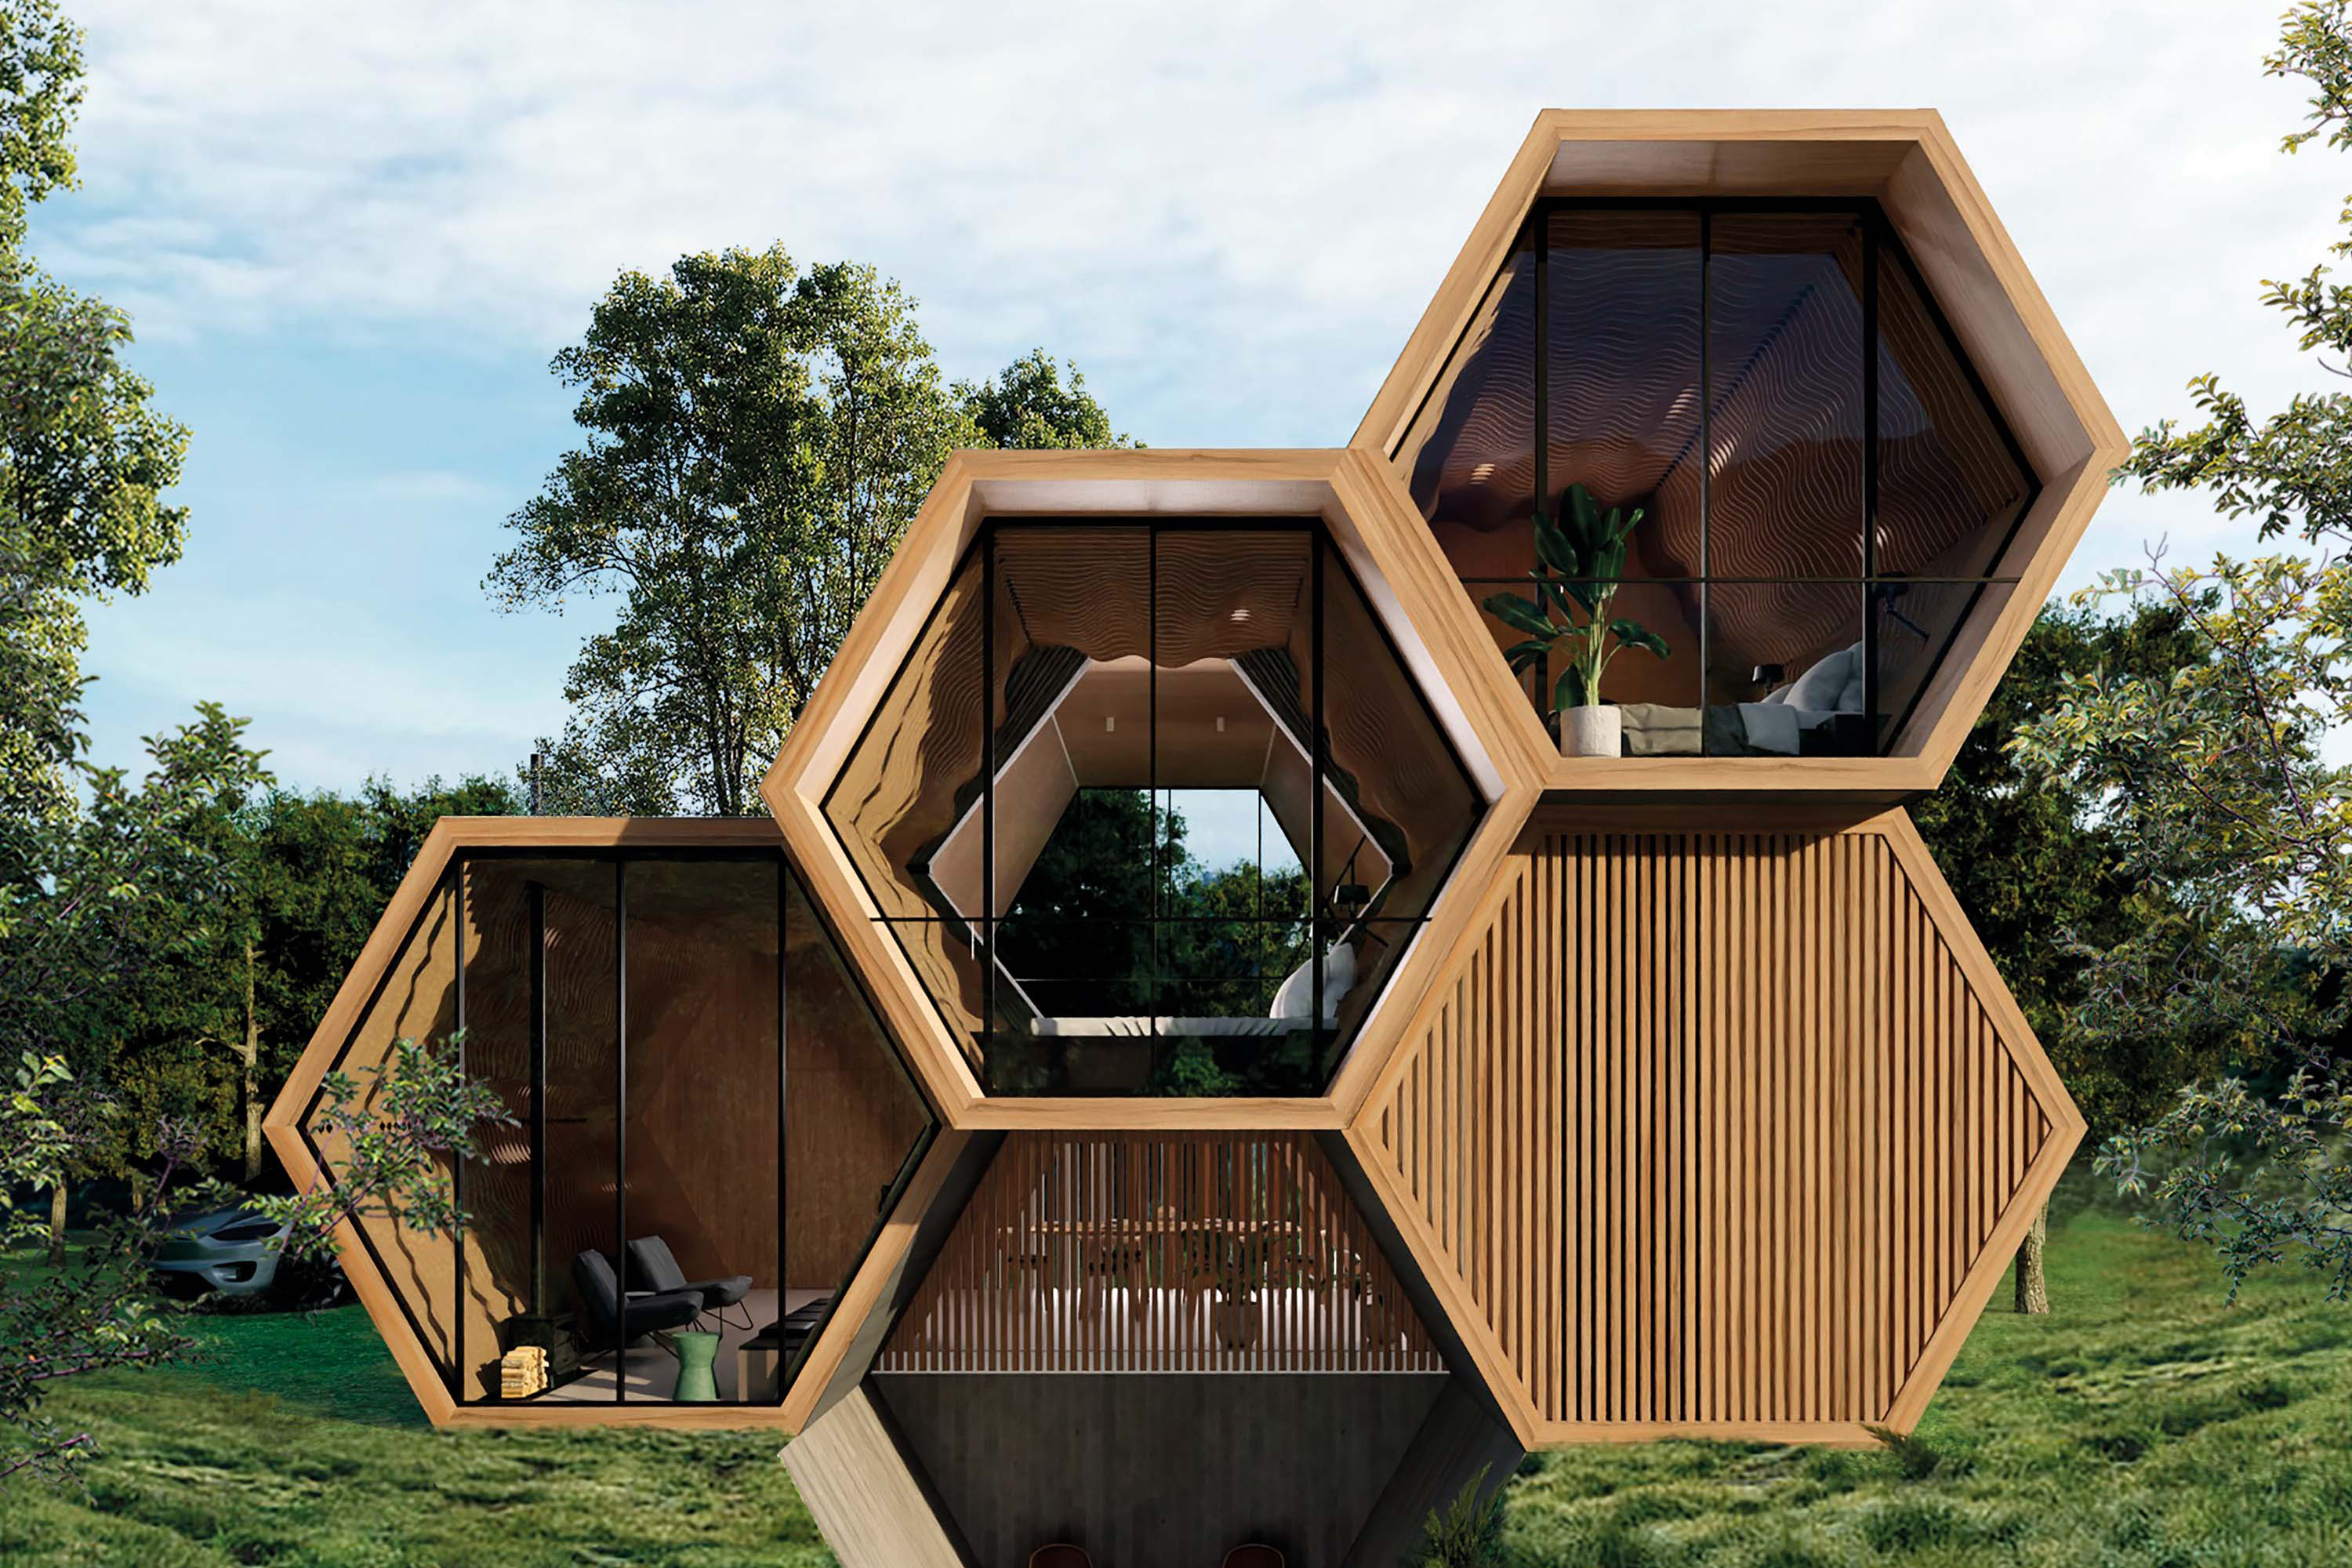 Airbnb to Give $100,000 to Homeowners With Craziest Rental Design